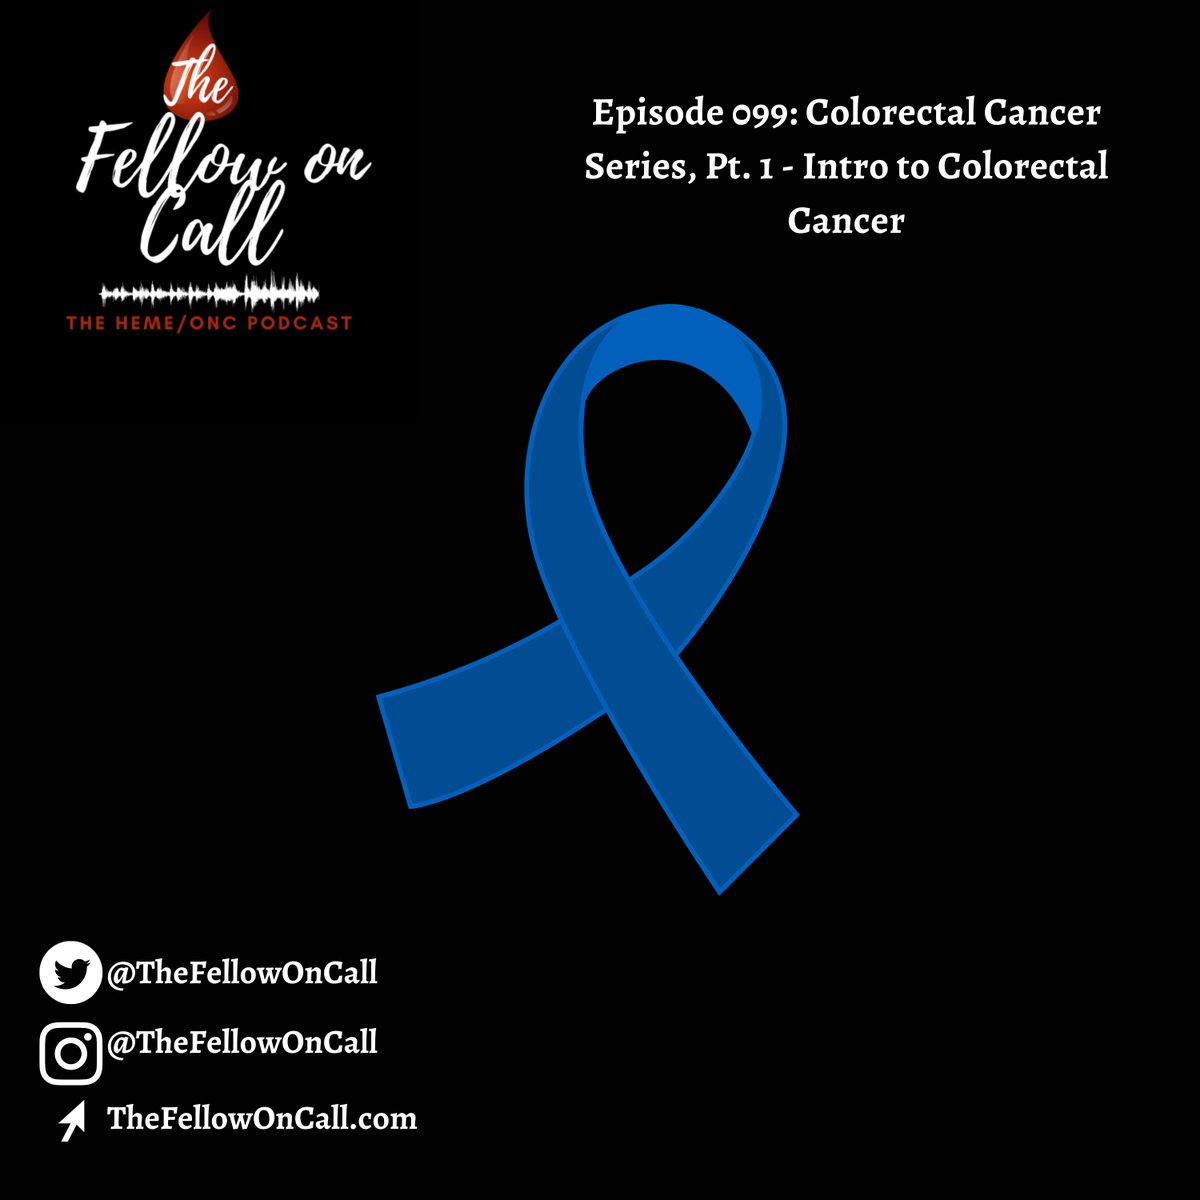 We are proud to roll out our *highly anticipated* colorectal cancer series! Today, we discuss the fundamentals, including key definitions and workup, to set you up for success! Get ready, y'all! This series is going to be 🔥 Link in bio!